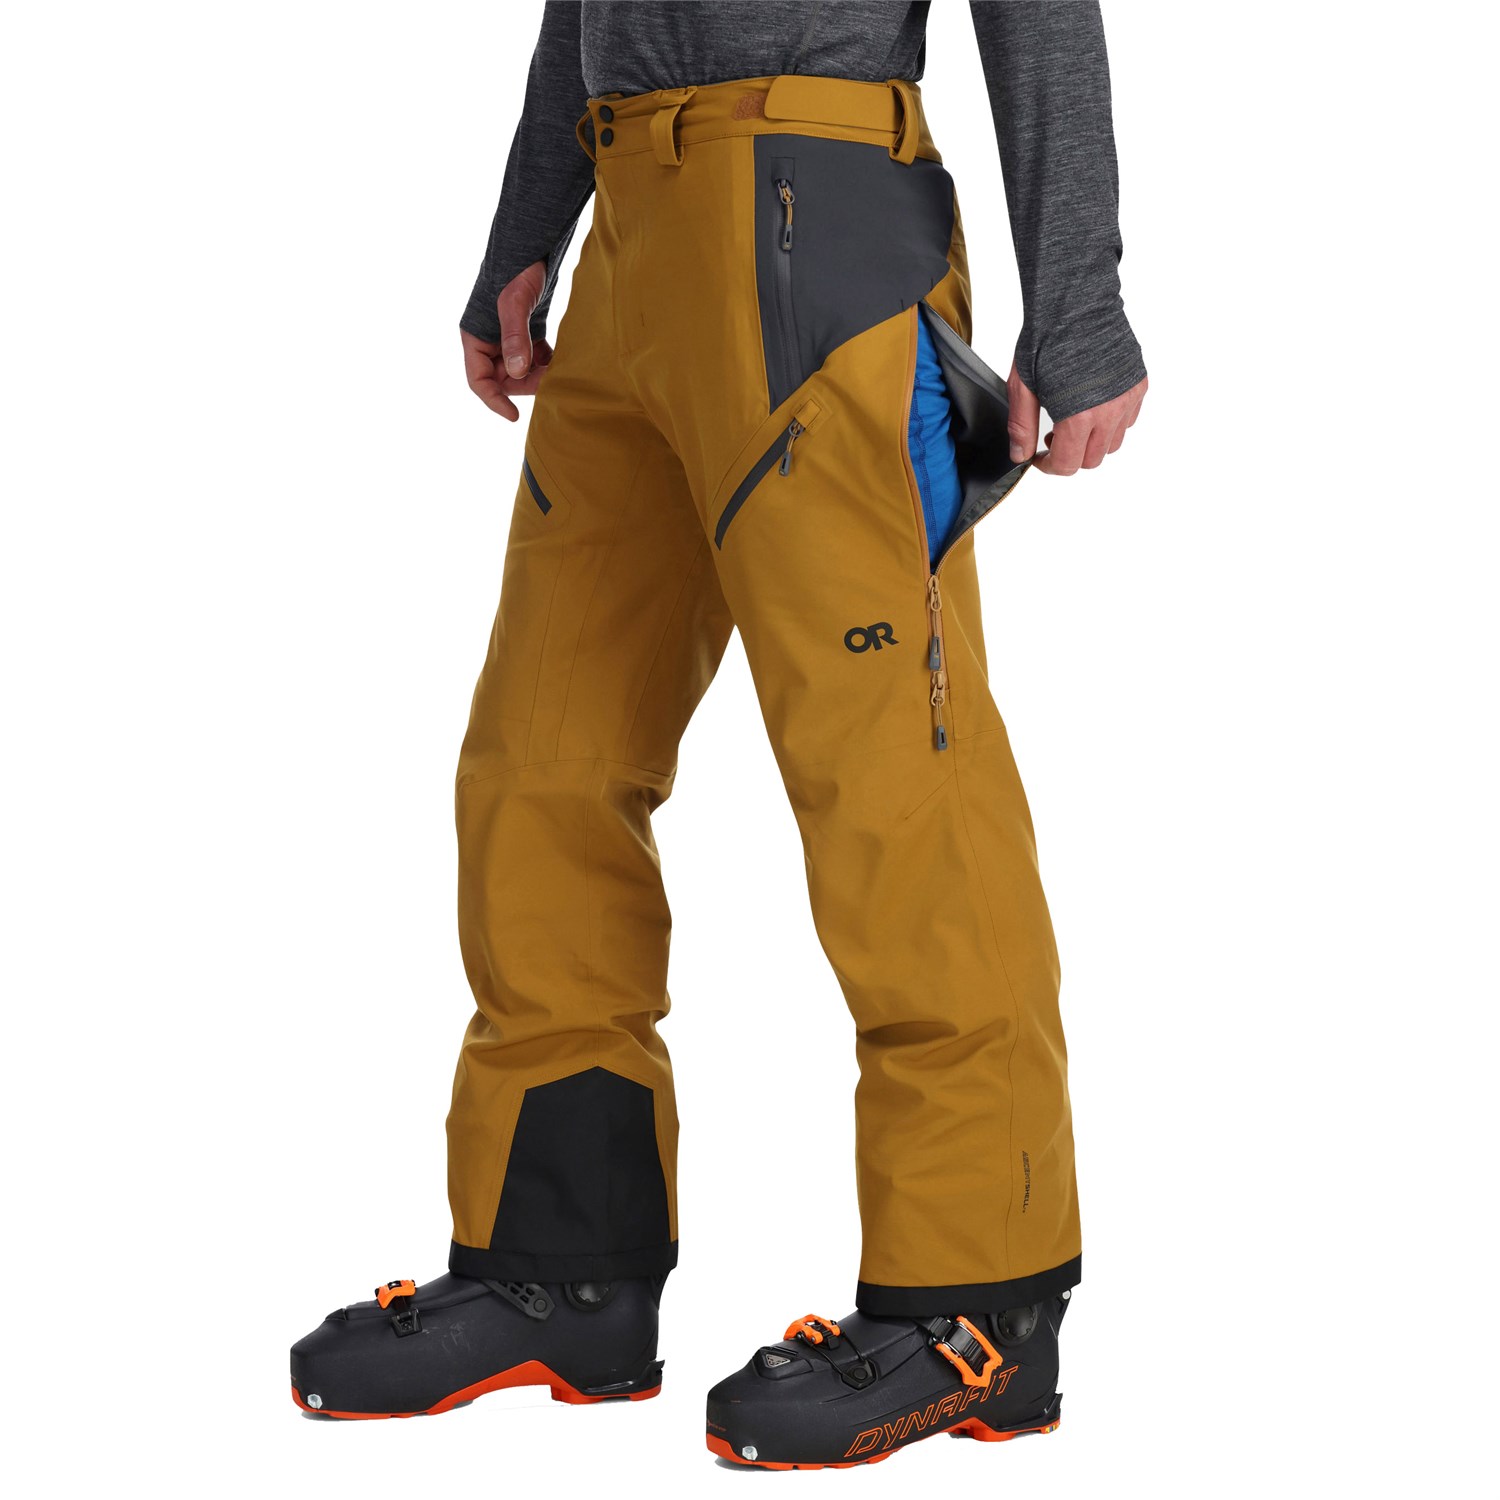 Outdoor Research Skyward II AscentShell - Women's Review